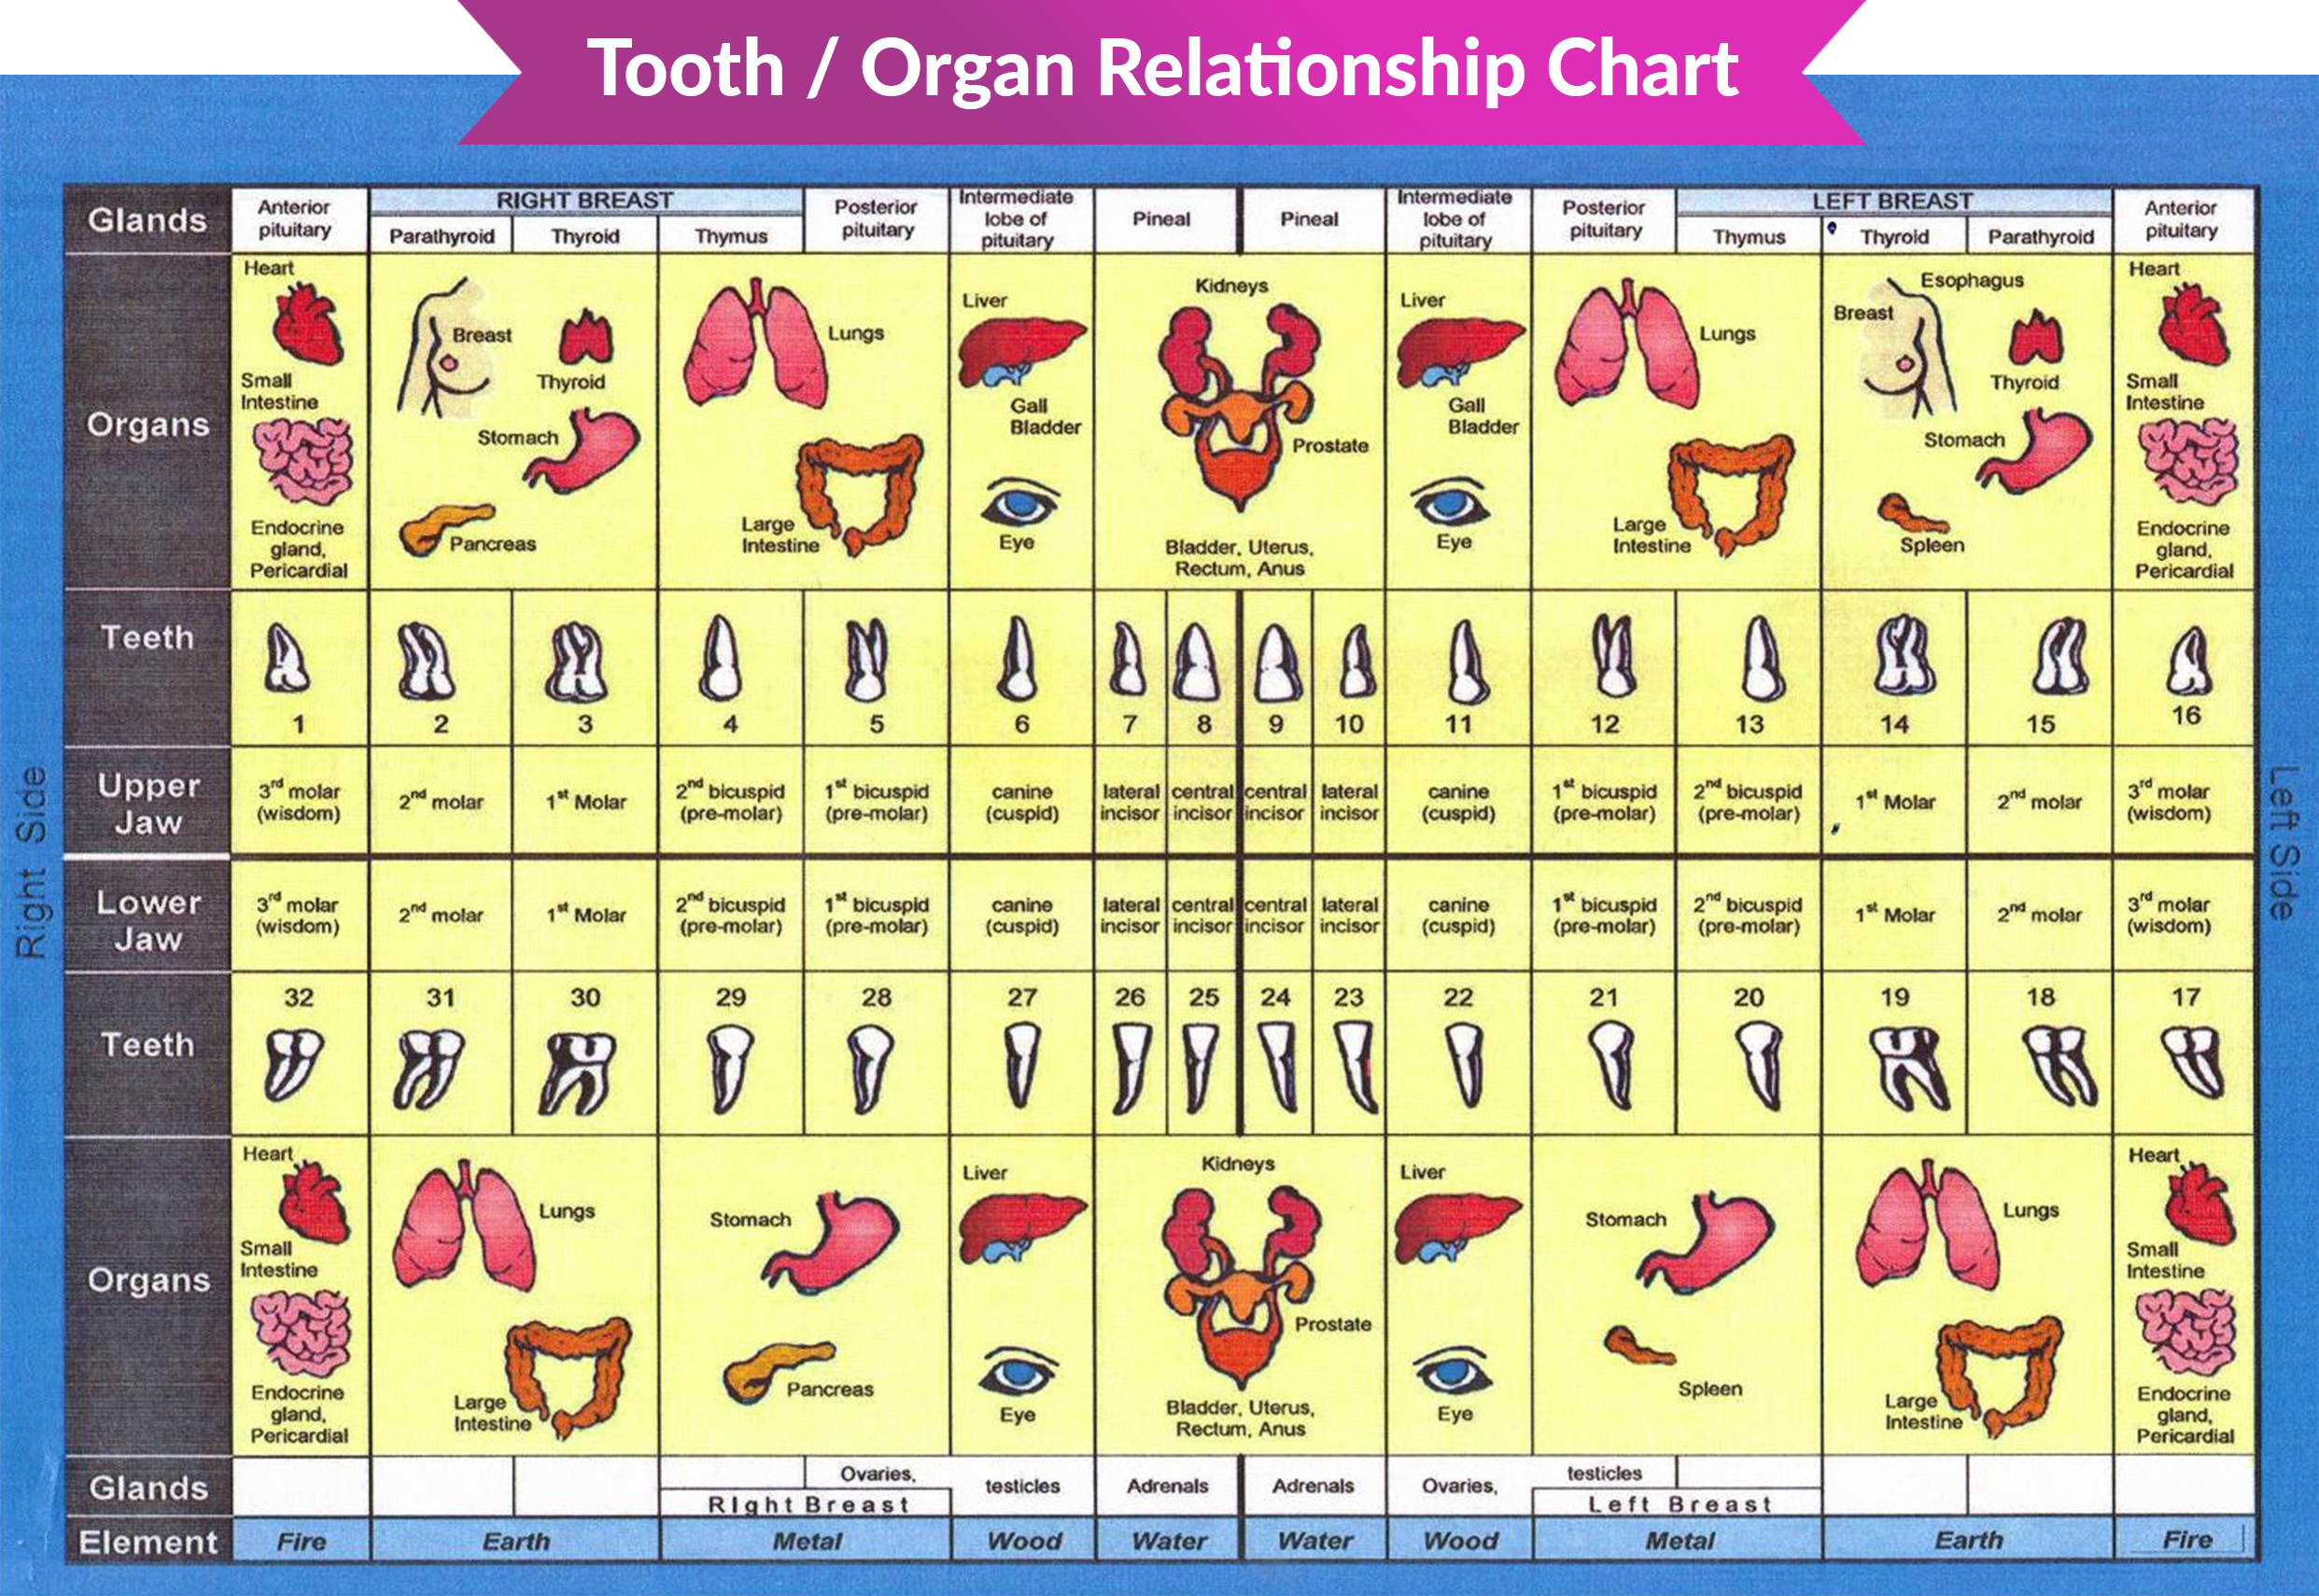 Tooth Meridian Chart